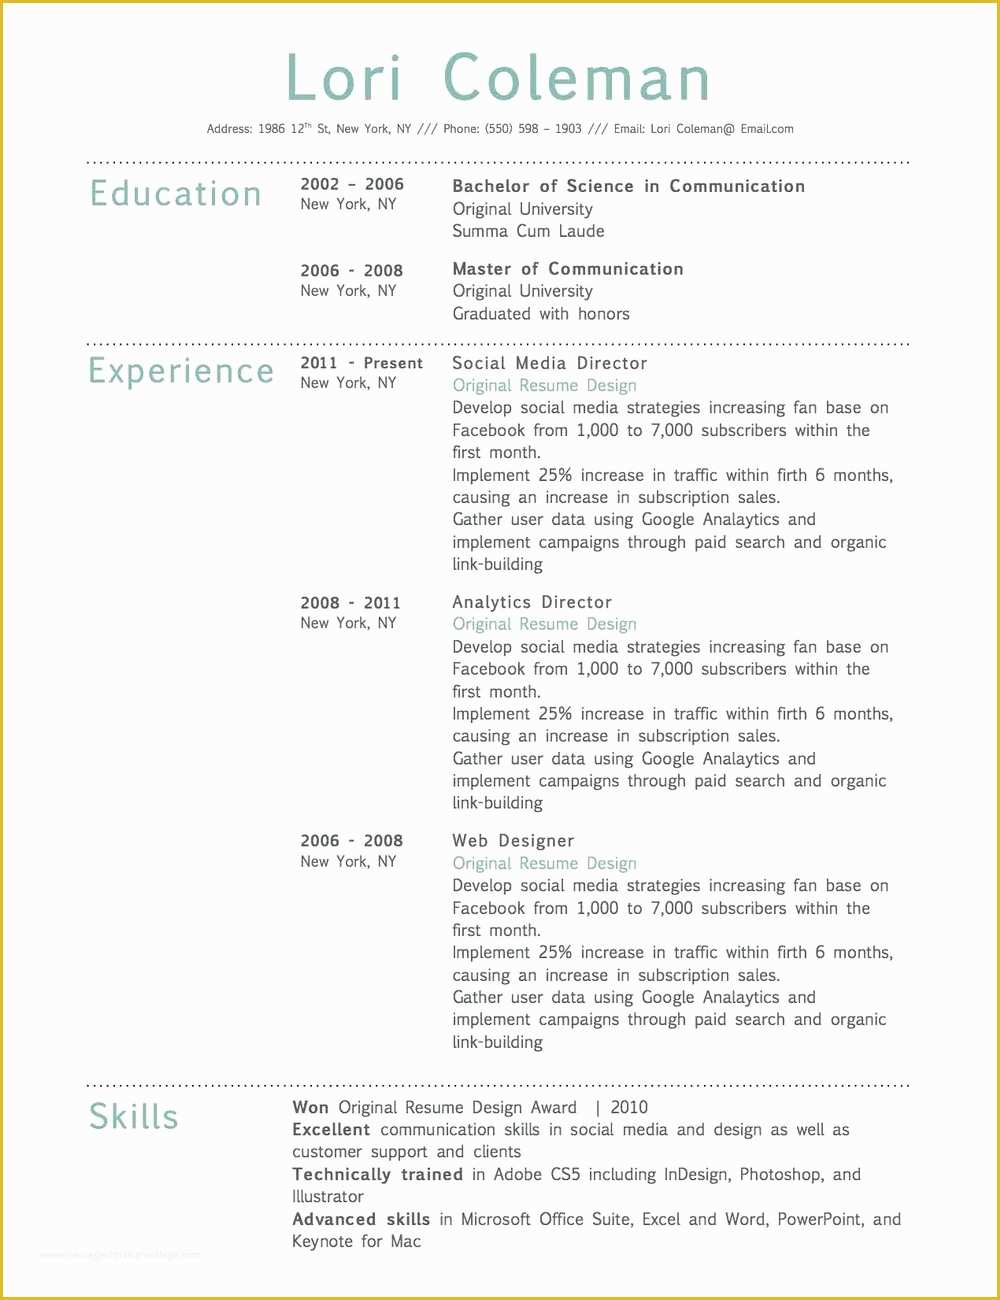 Free Resume Templates for Macbook Pro Of Free Resume Templates for Macbook Pro Resumes 95